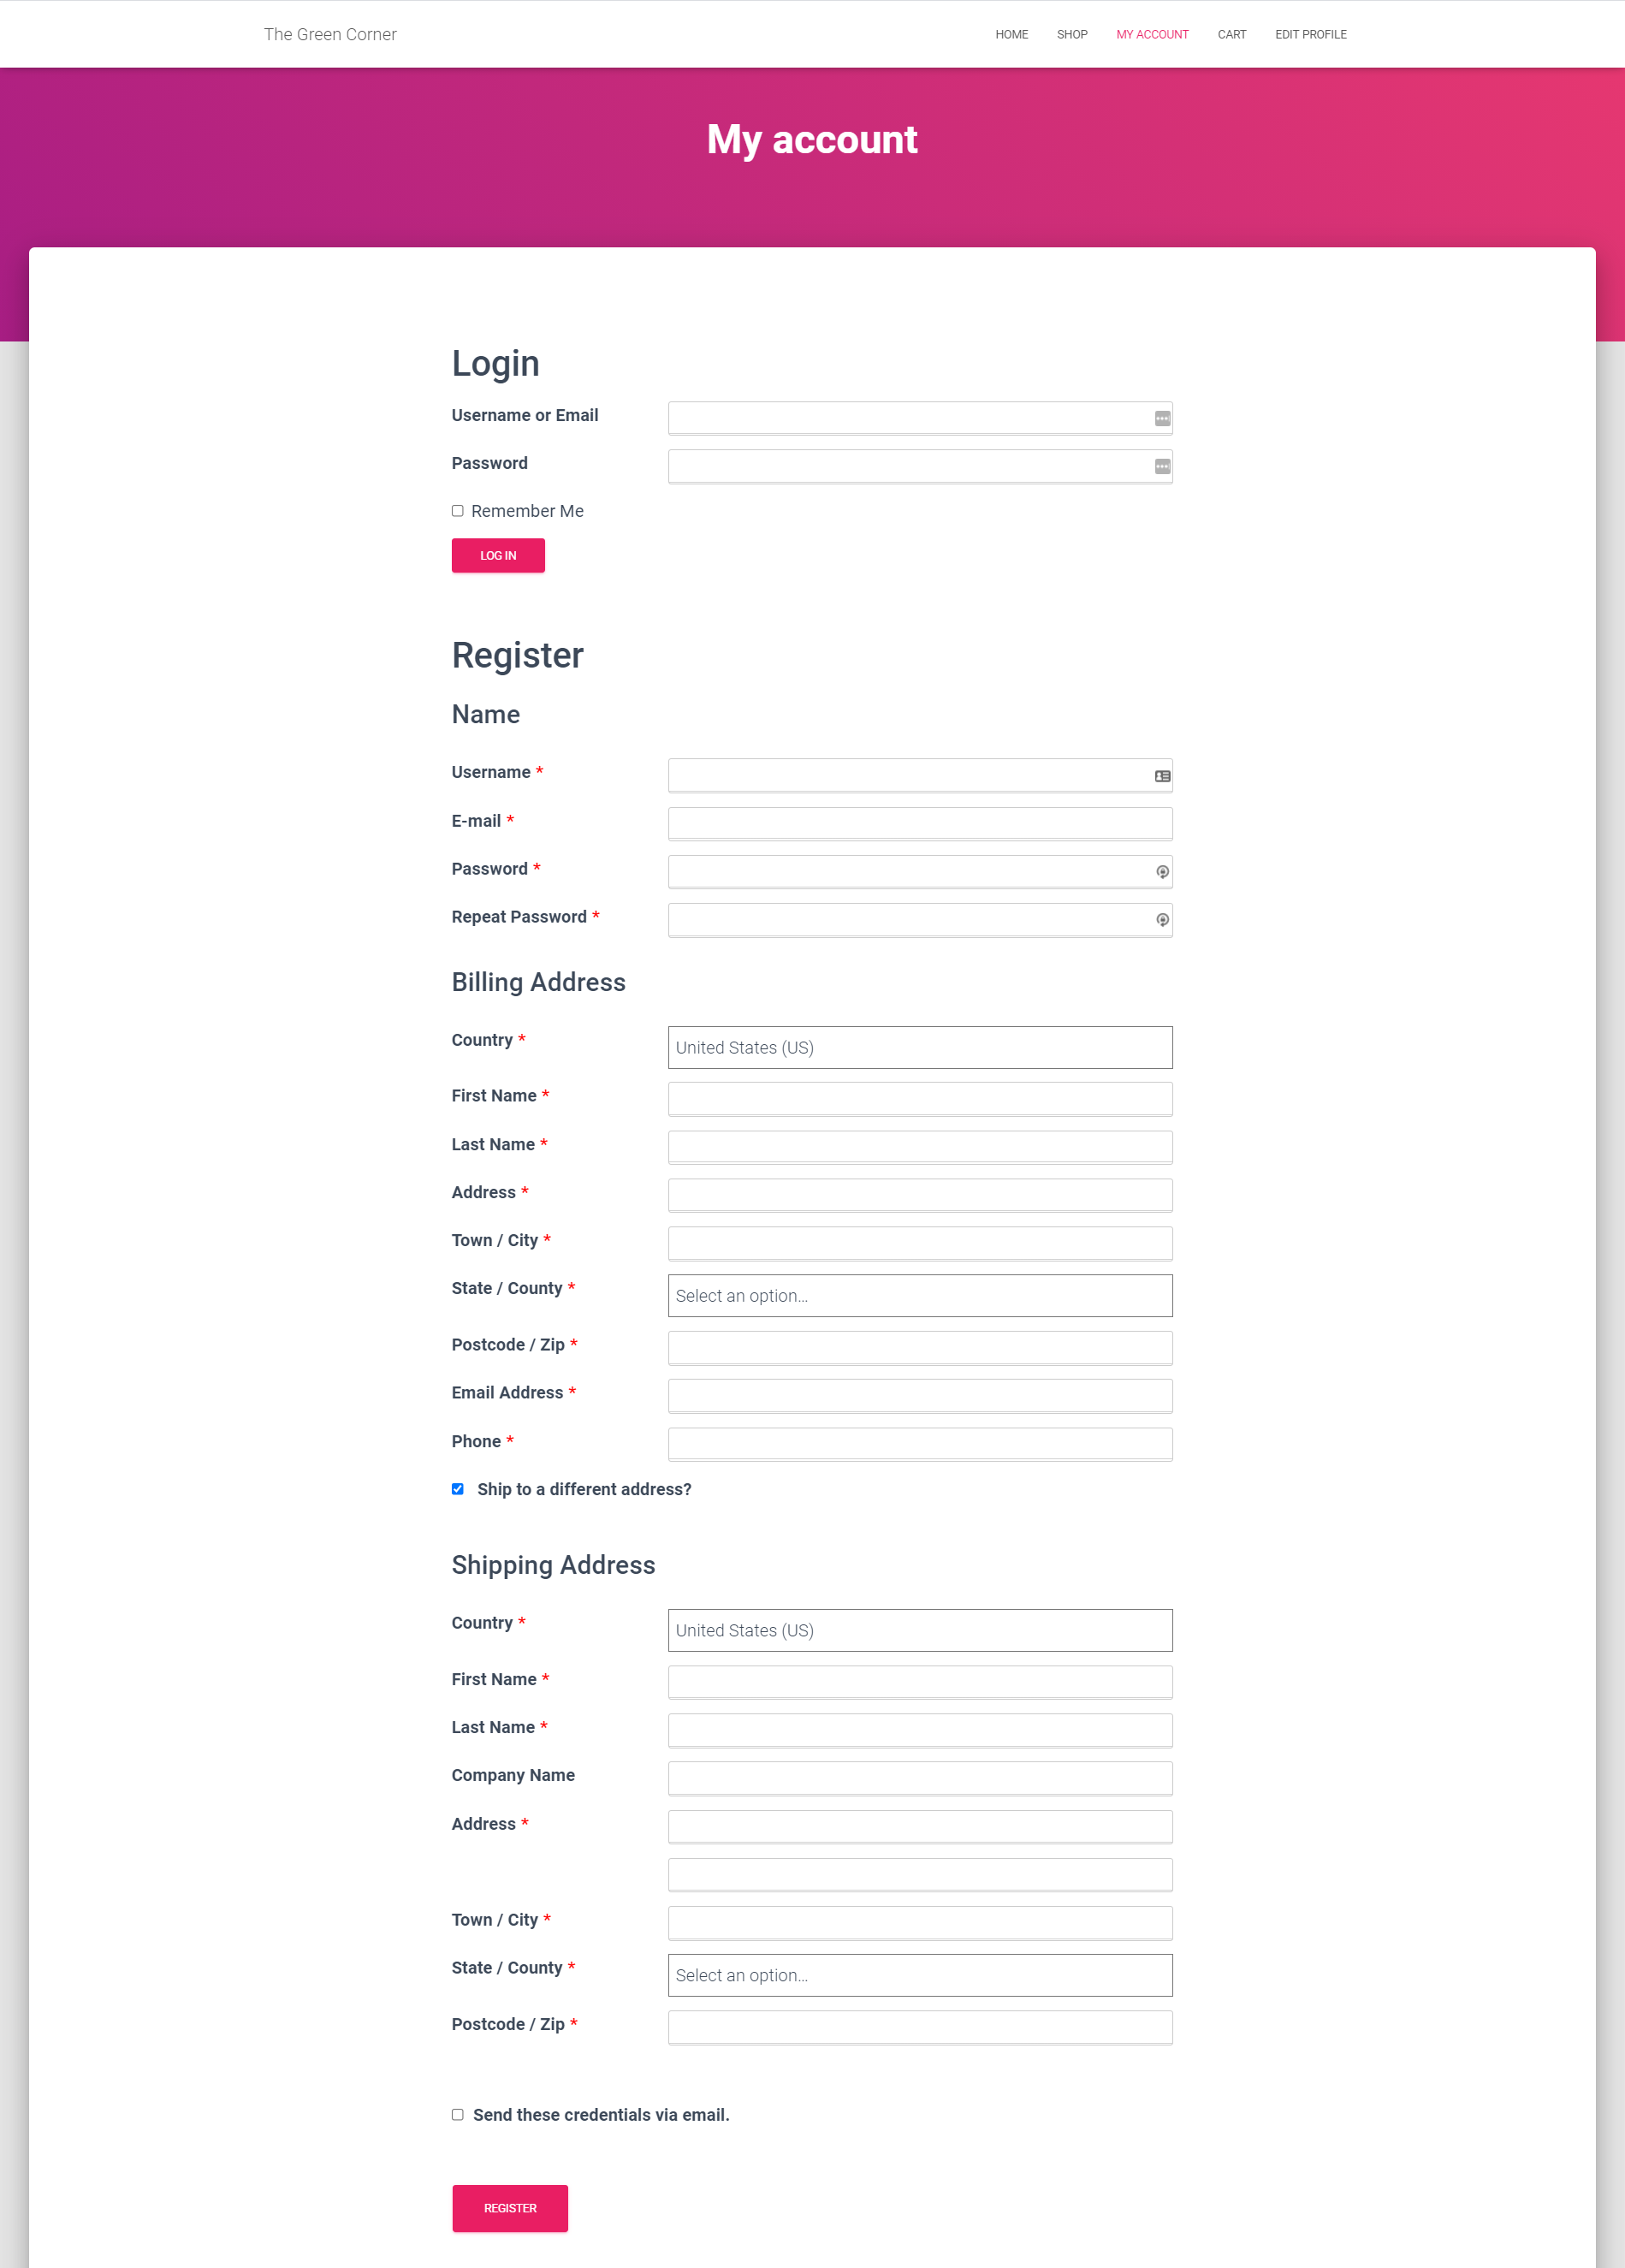 How to customize the WooCommerce My Account page for registration